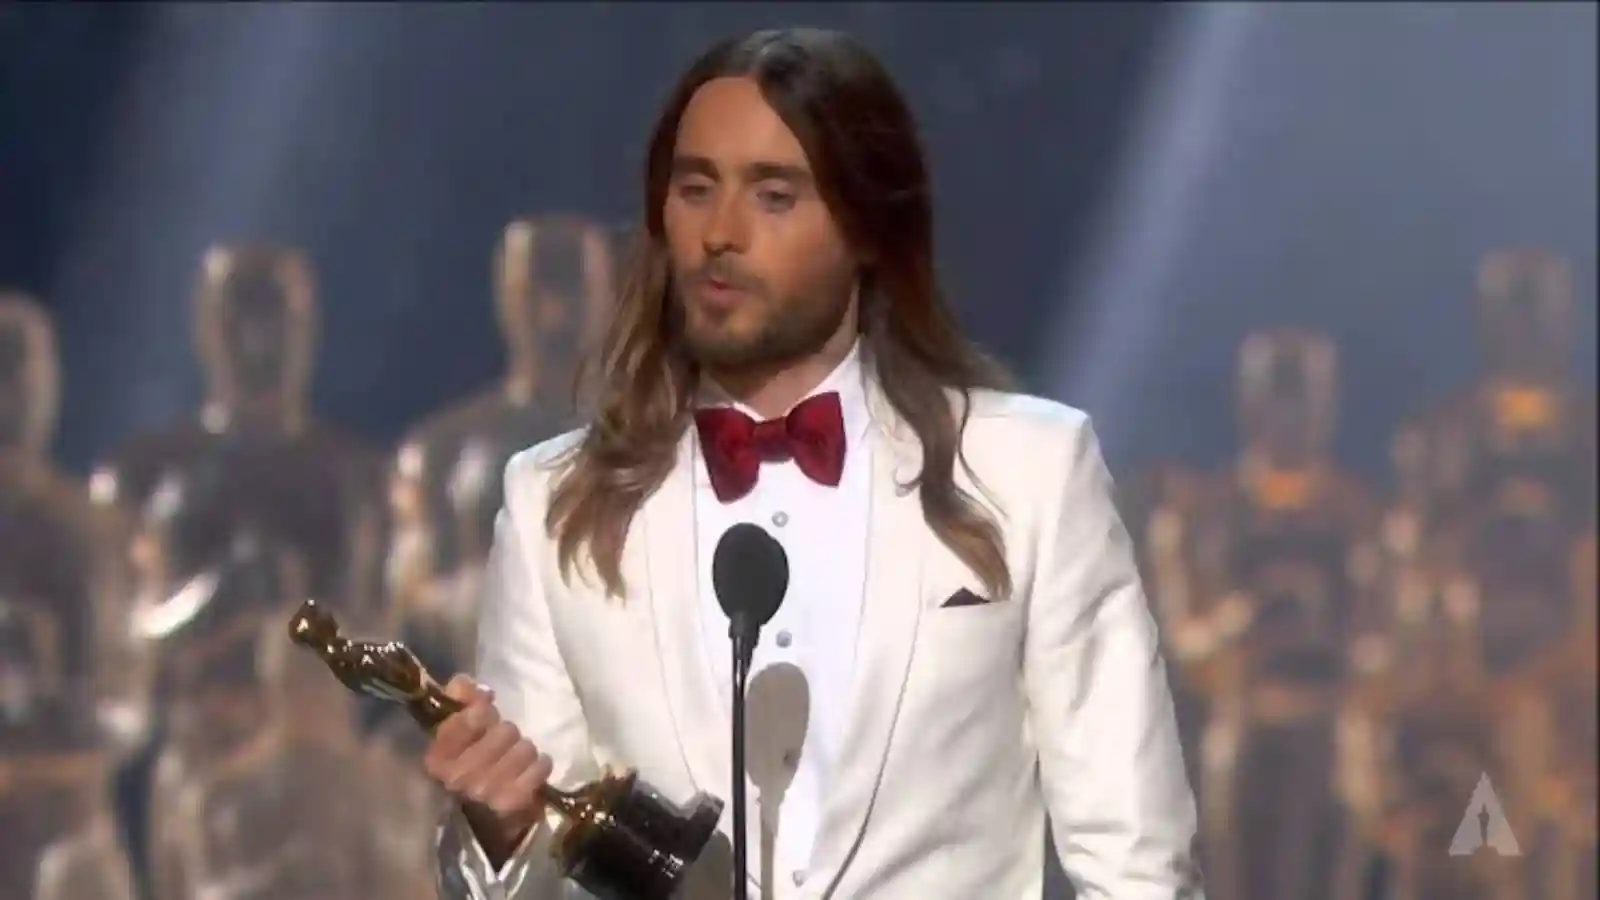 Jared Leto during Academy Awards 2014